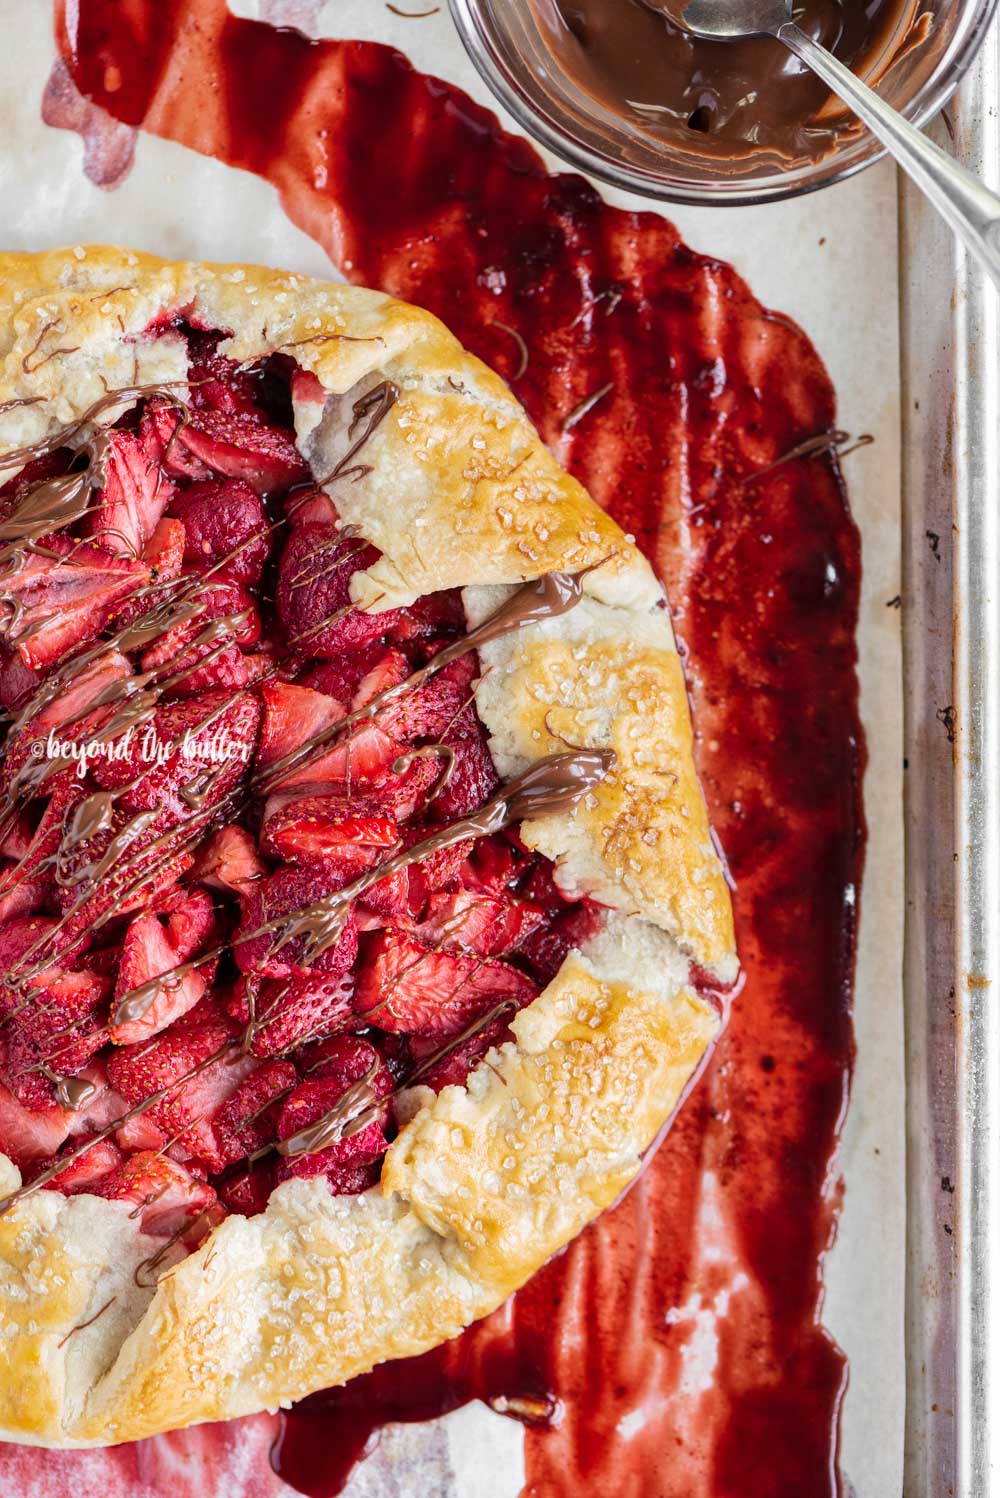 Overhead image of a Berry Nutella Galette on a baking sheet with Nutella drizzled over the top | All Images © Beyond the Butter™